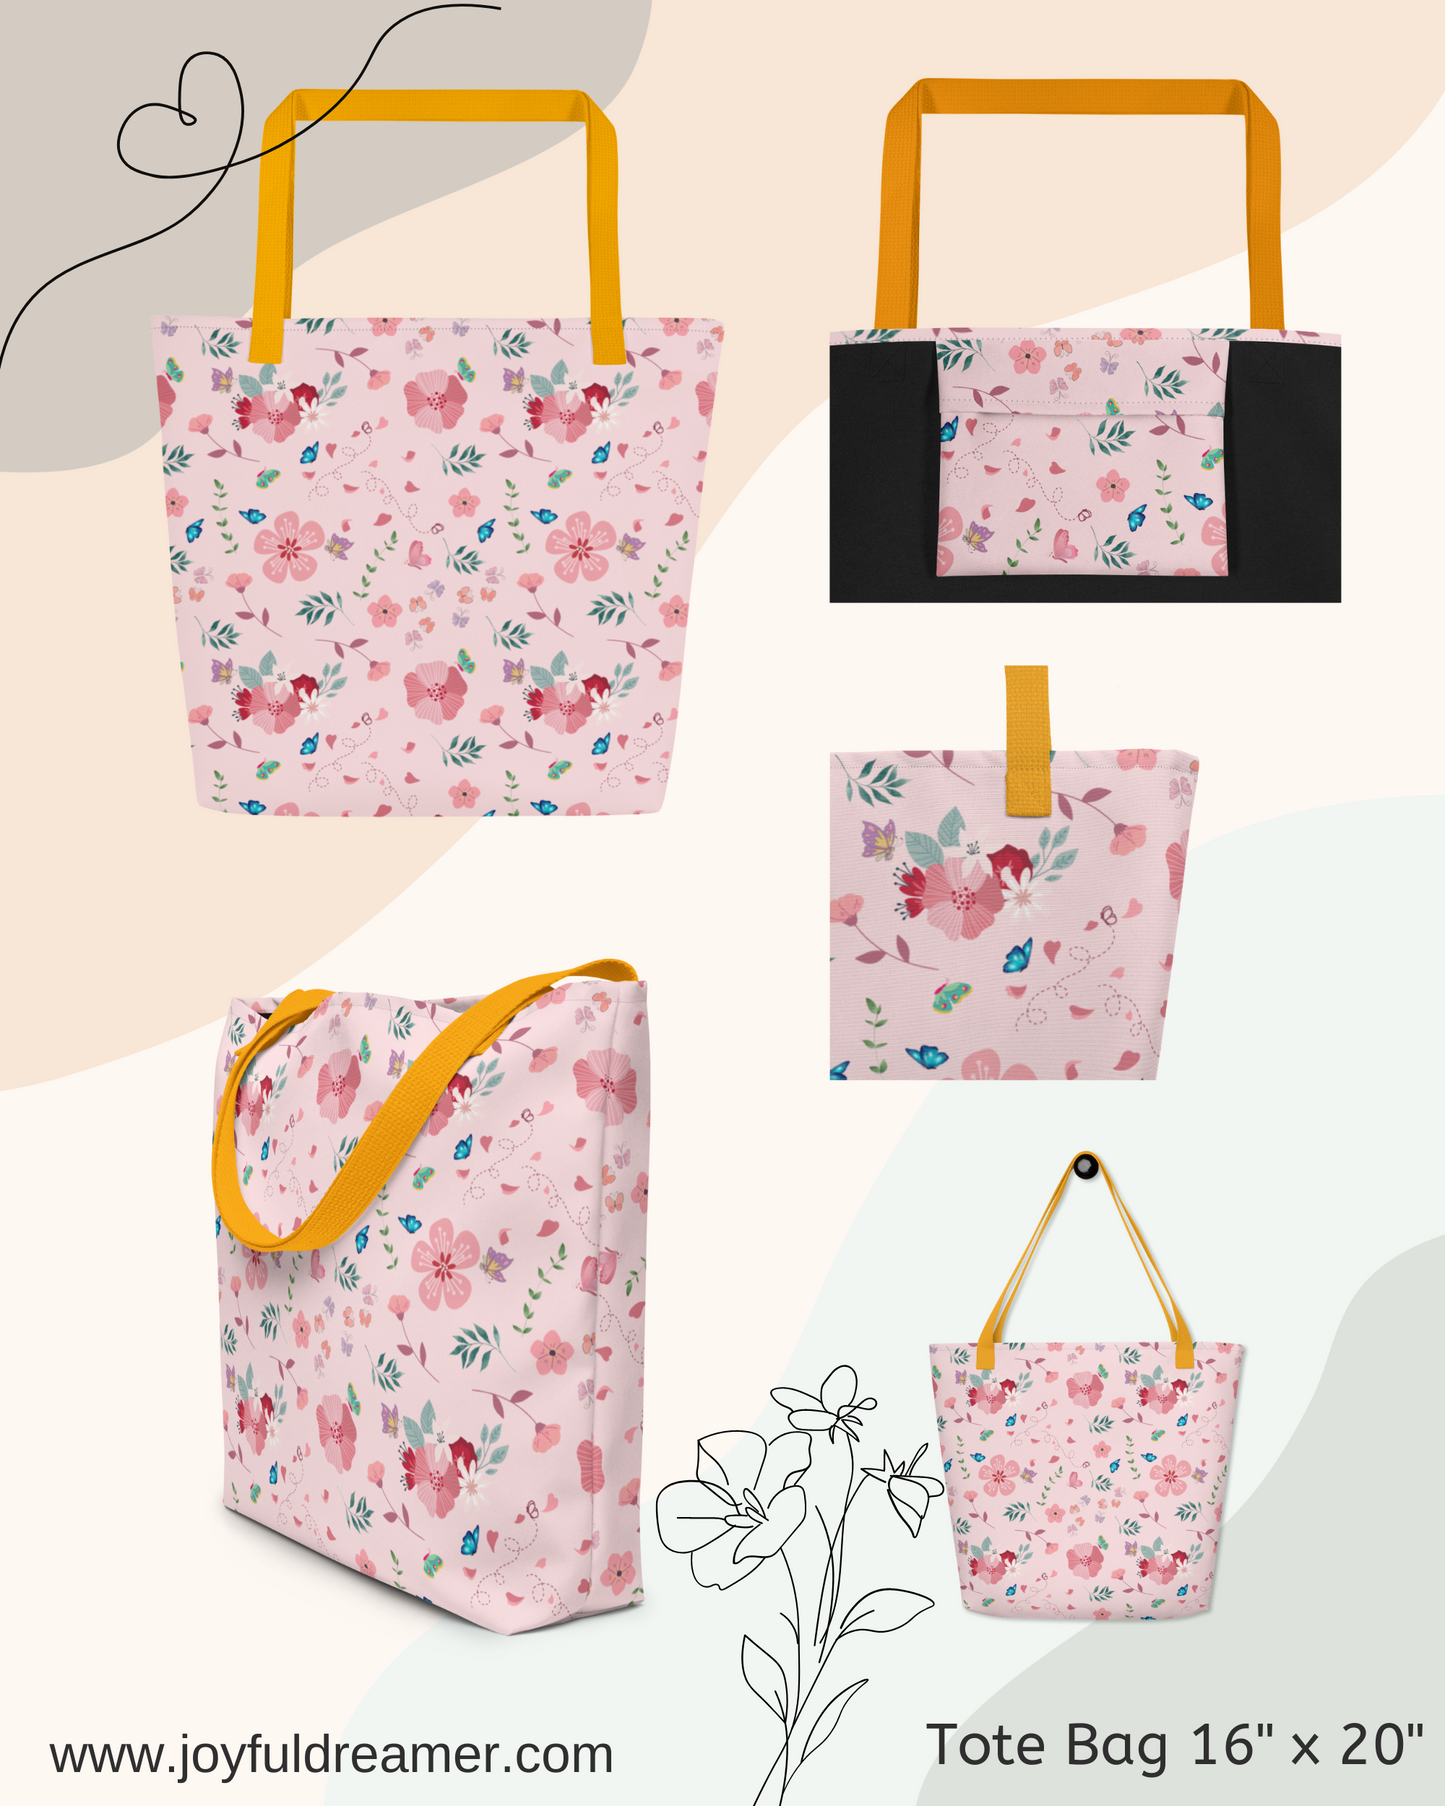 Large Tote Bag 16" x 20" | Pink Floral Butterfly Themed